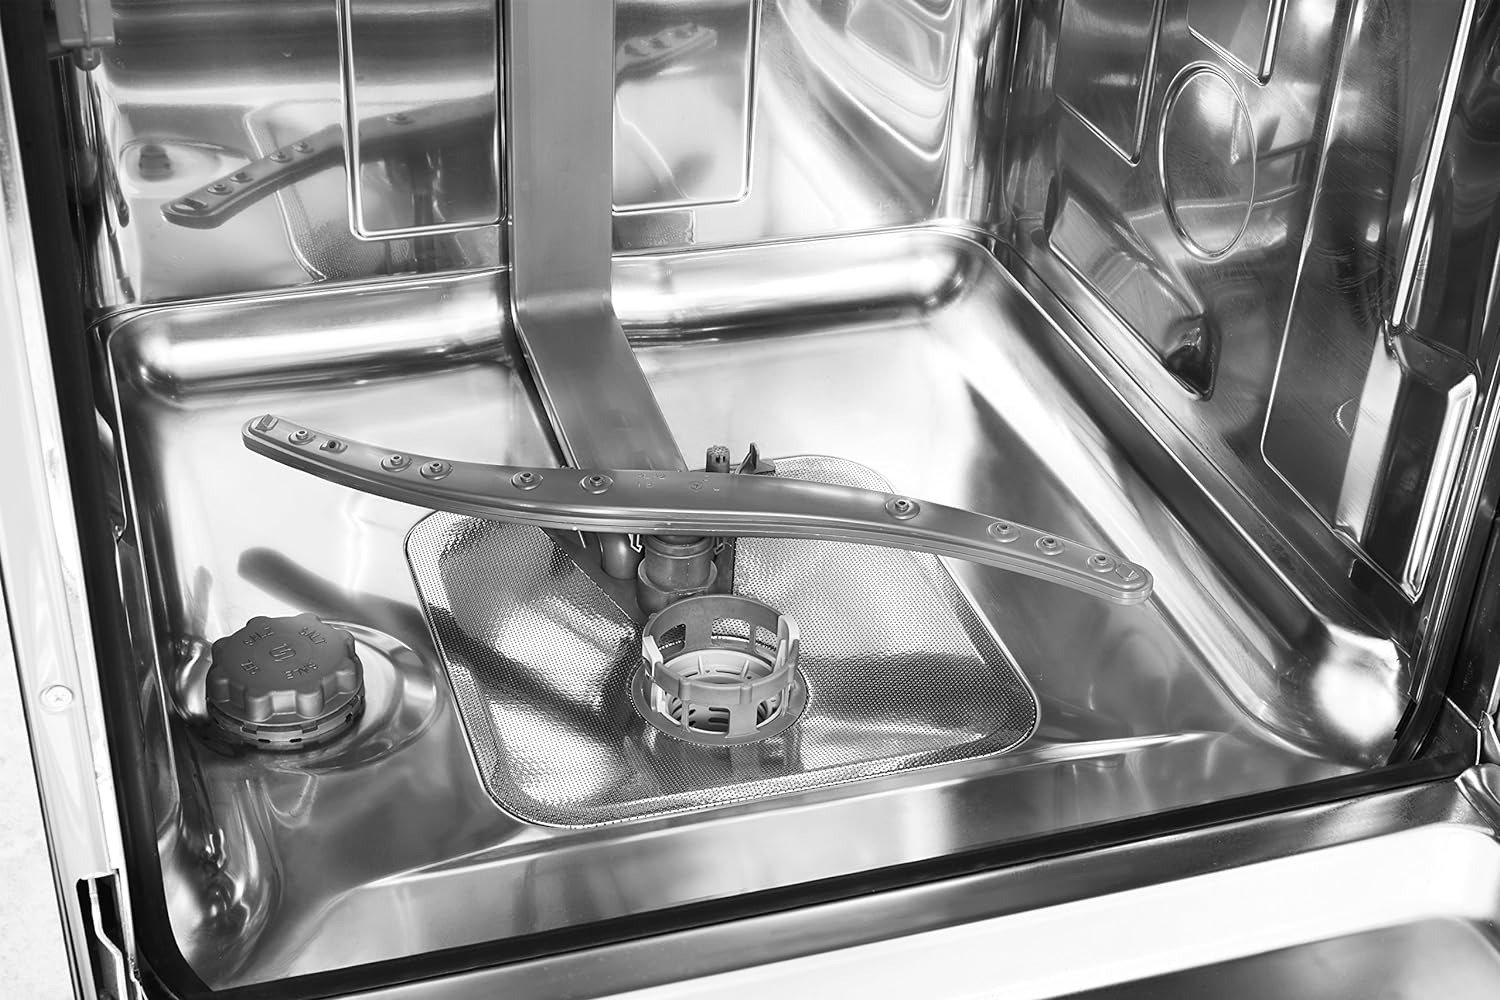 a close-up of a dishwasher